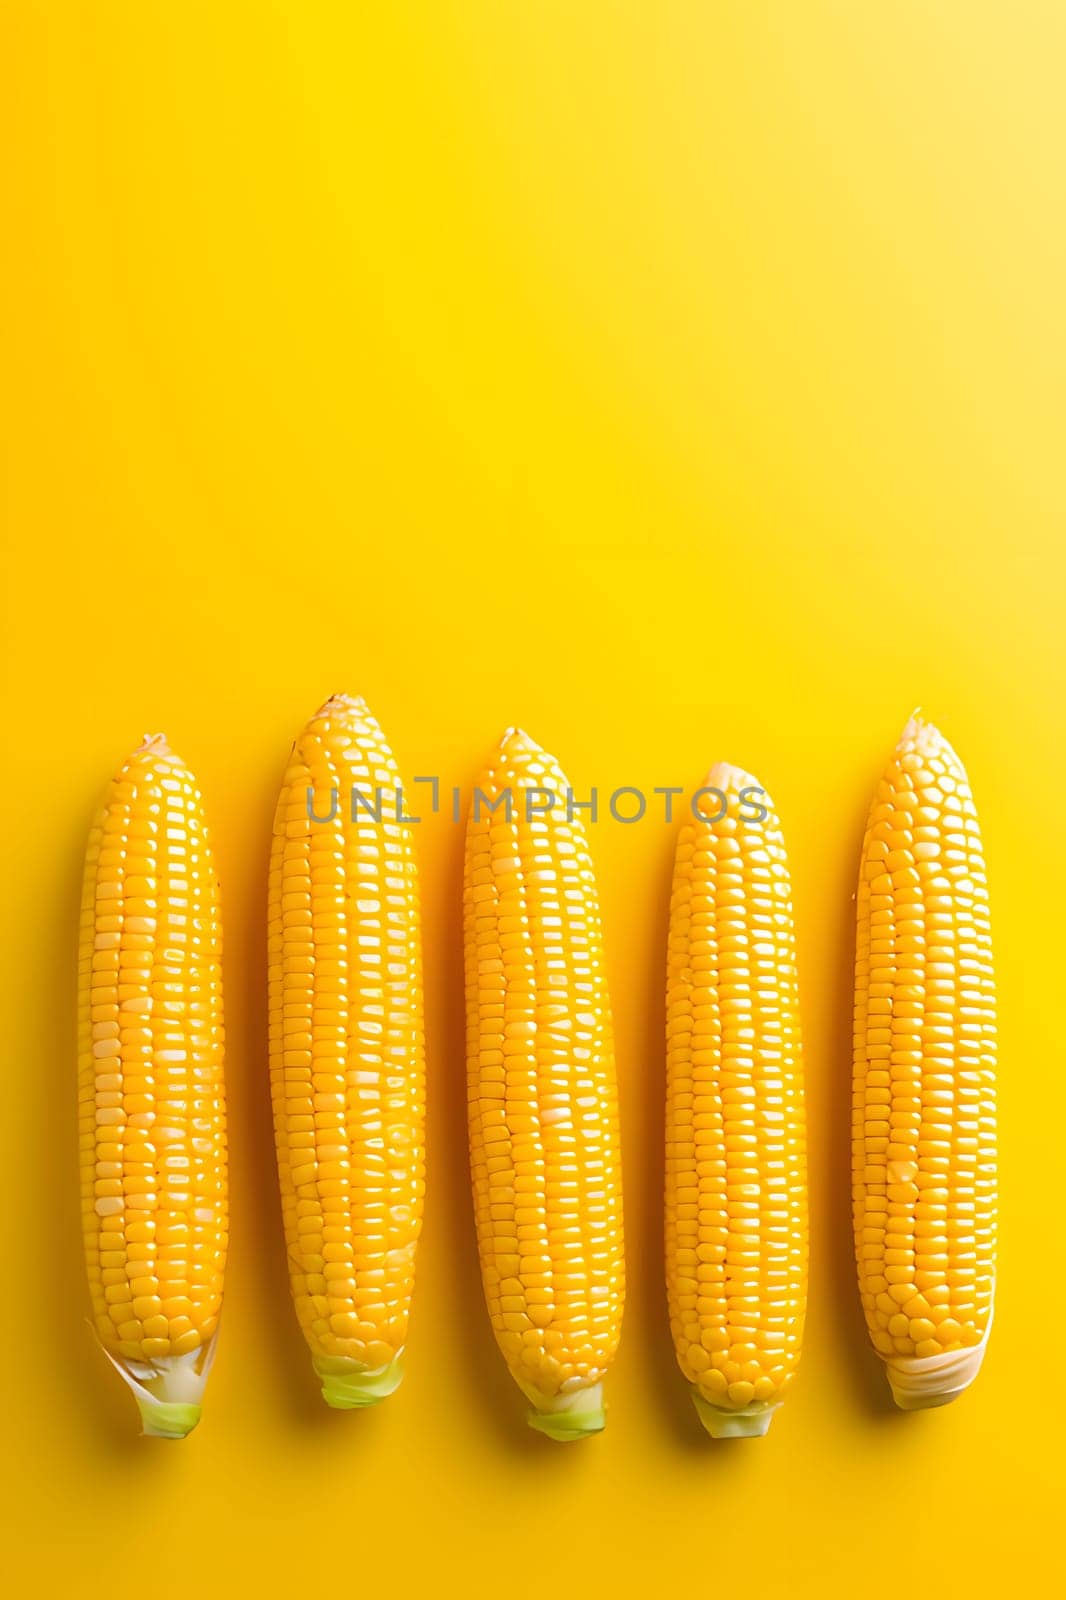 Lying at the bottom yellow corn cobs on a bright yellow orange background., banner with space for your own content. Blurred background. Blank space for caption.